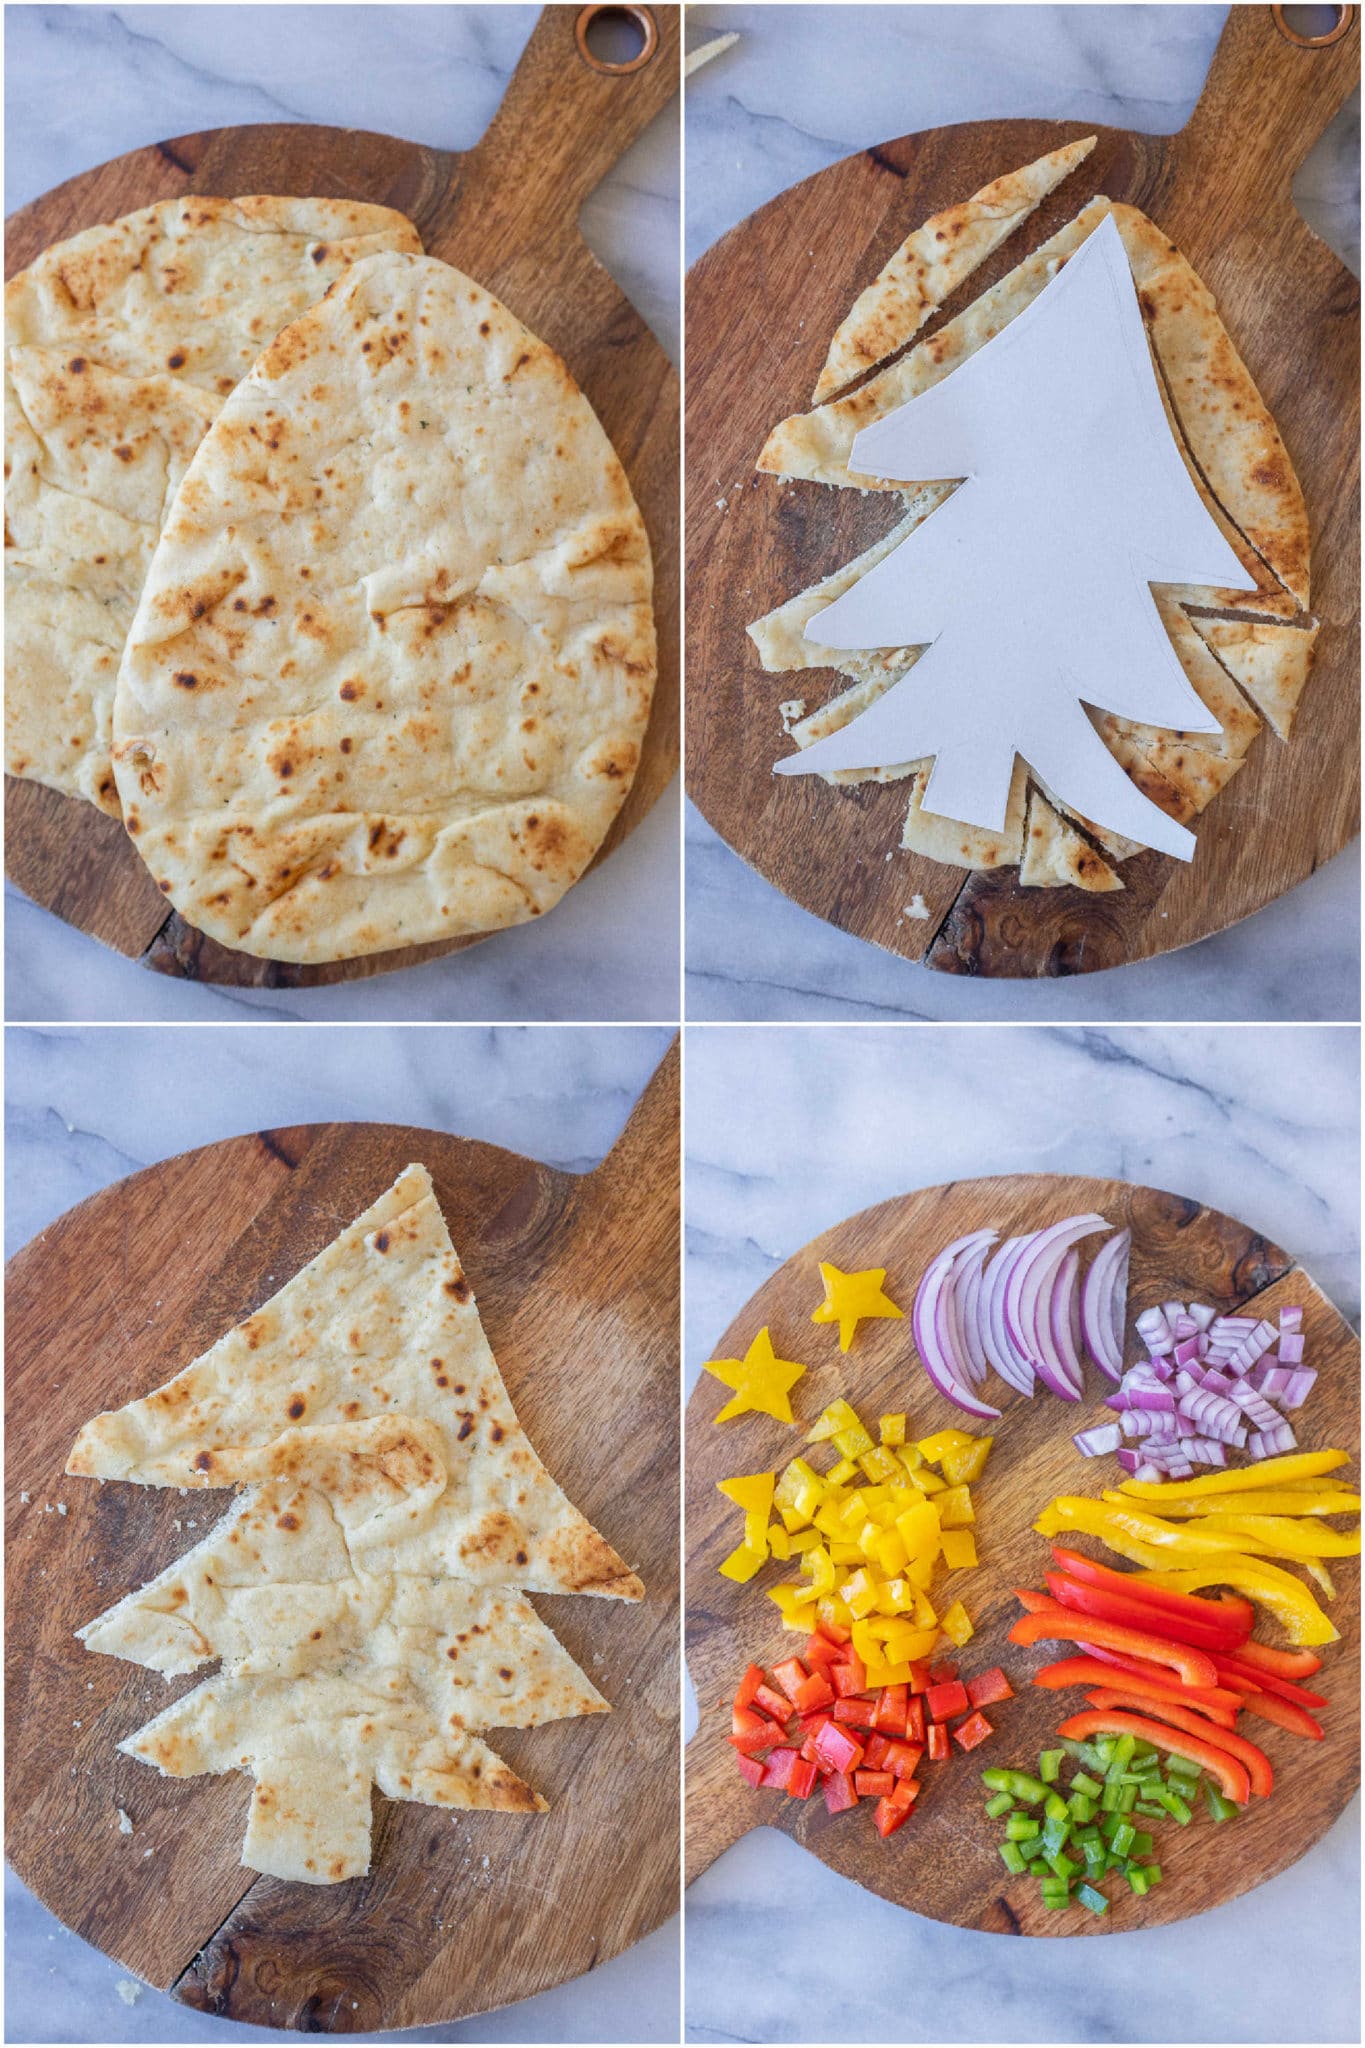 showing how to cut the naan bread into a tree shape and the veggies cut up for the pesto pizza toppings